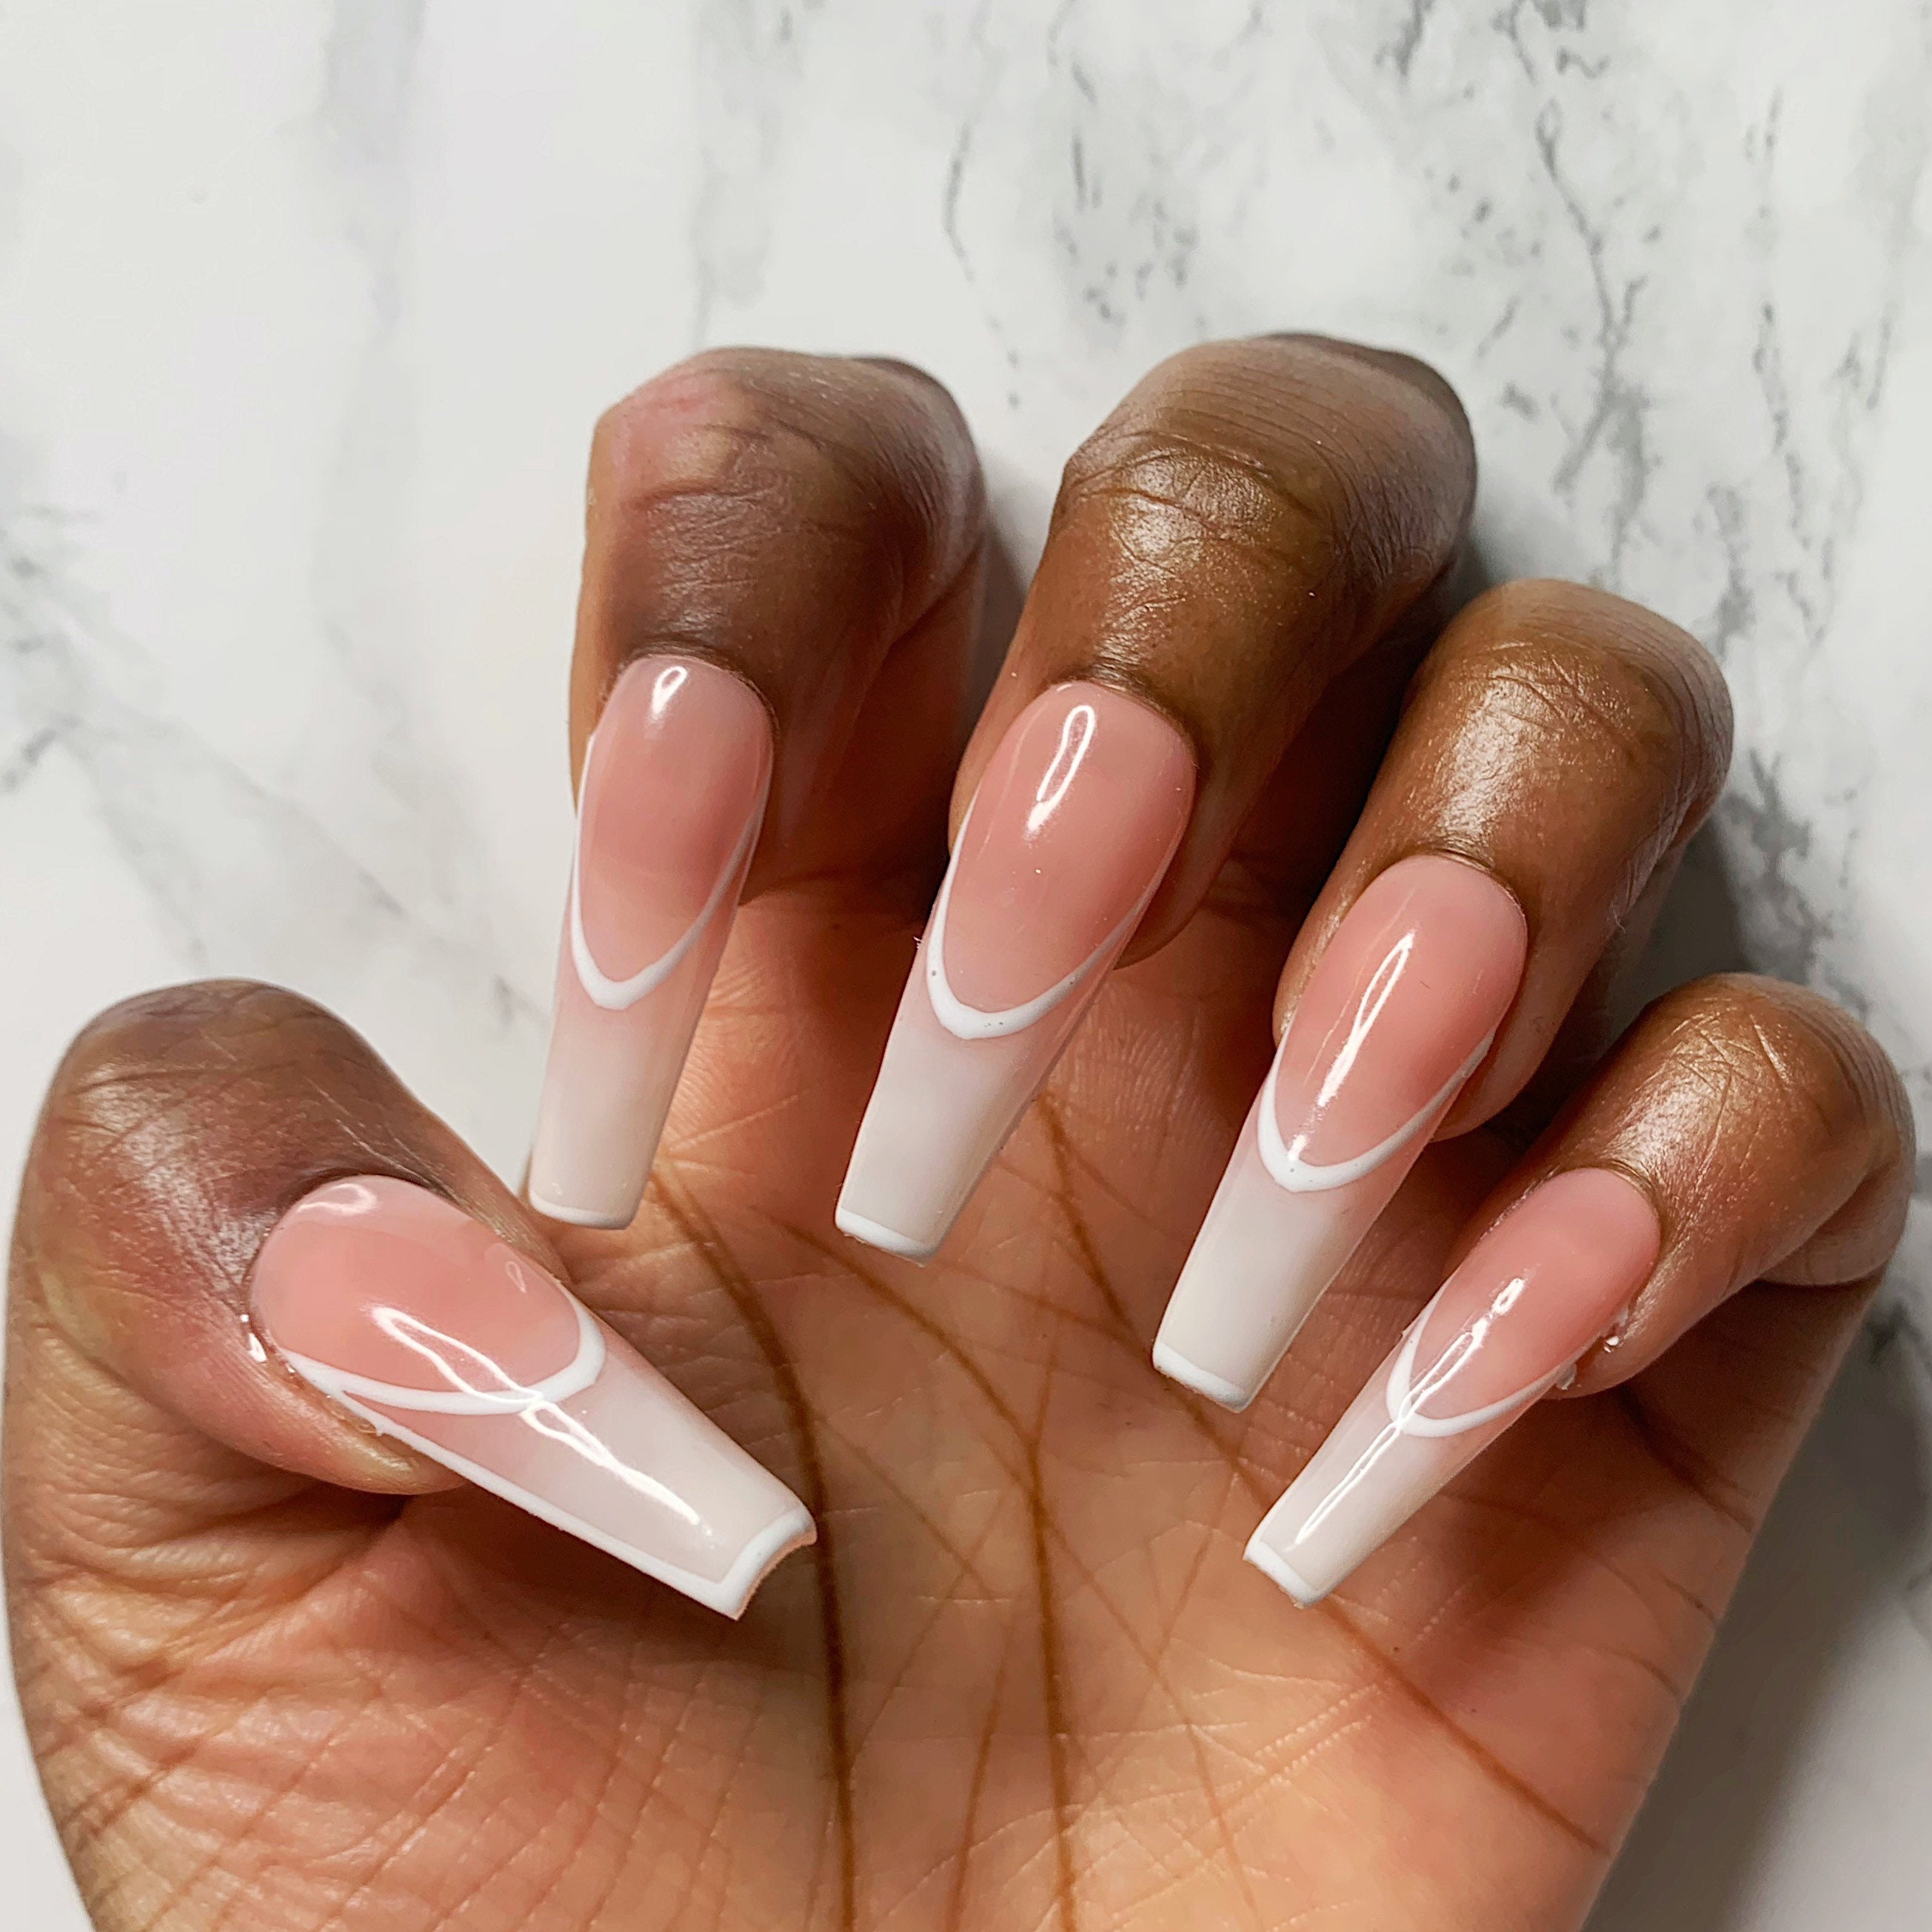 The French Manicure Is Back & Better Than Ever – gabrielcosmetics